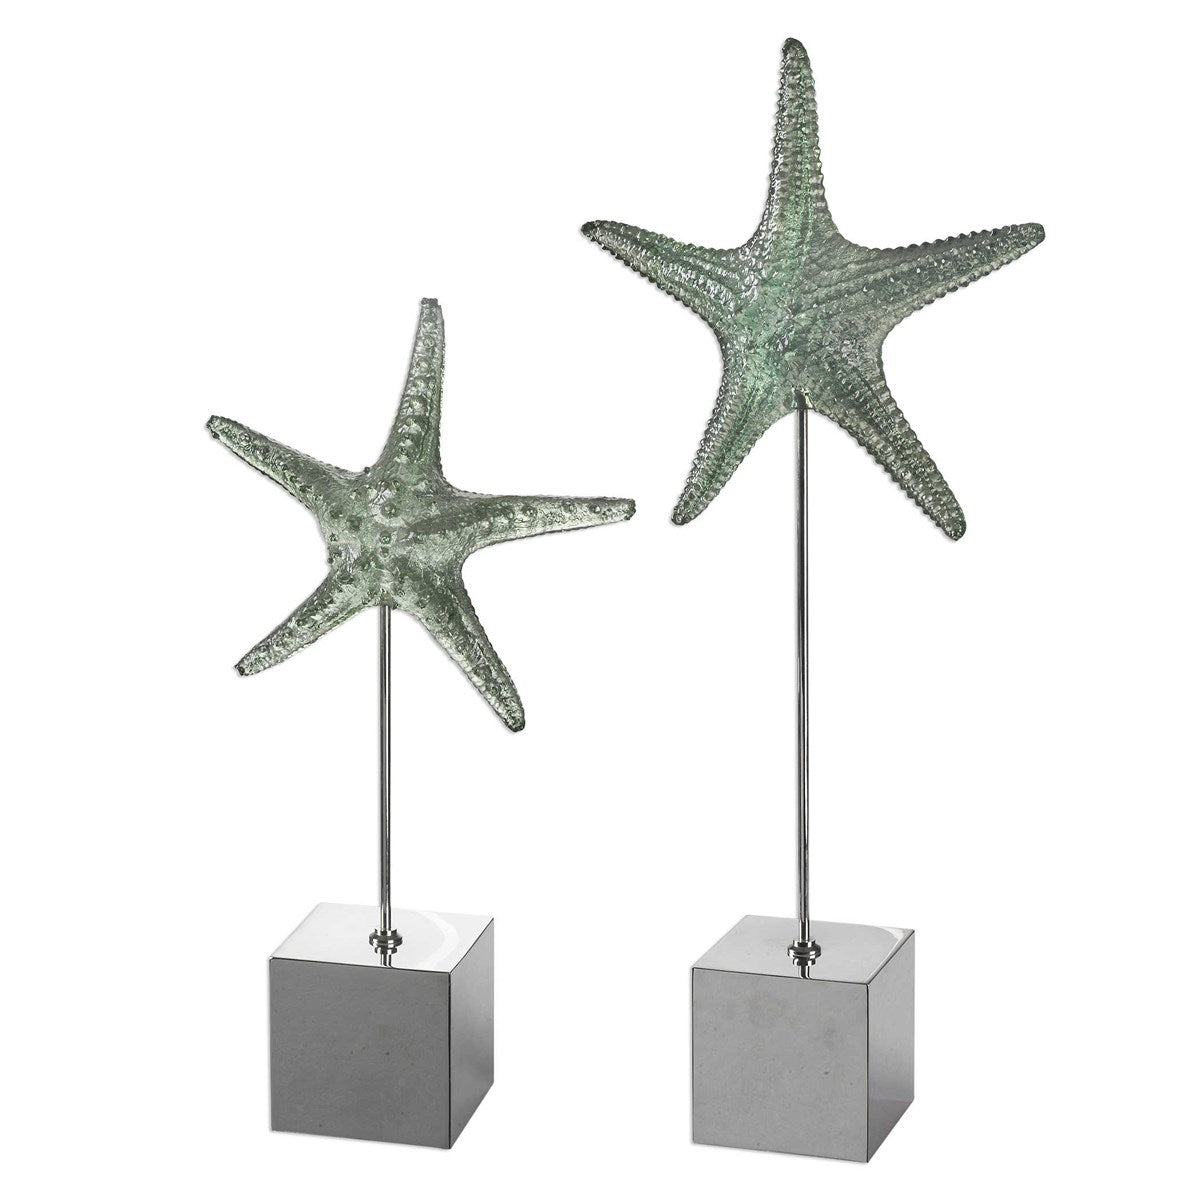 Realistic starfish replicas feature a pale, marine green finish and sit atop tarnished silver stands